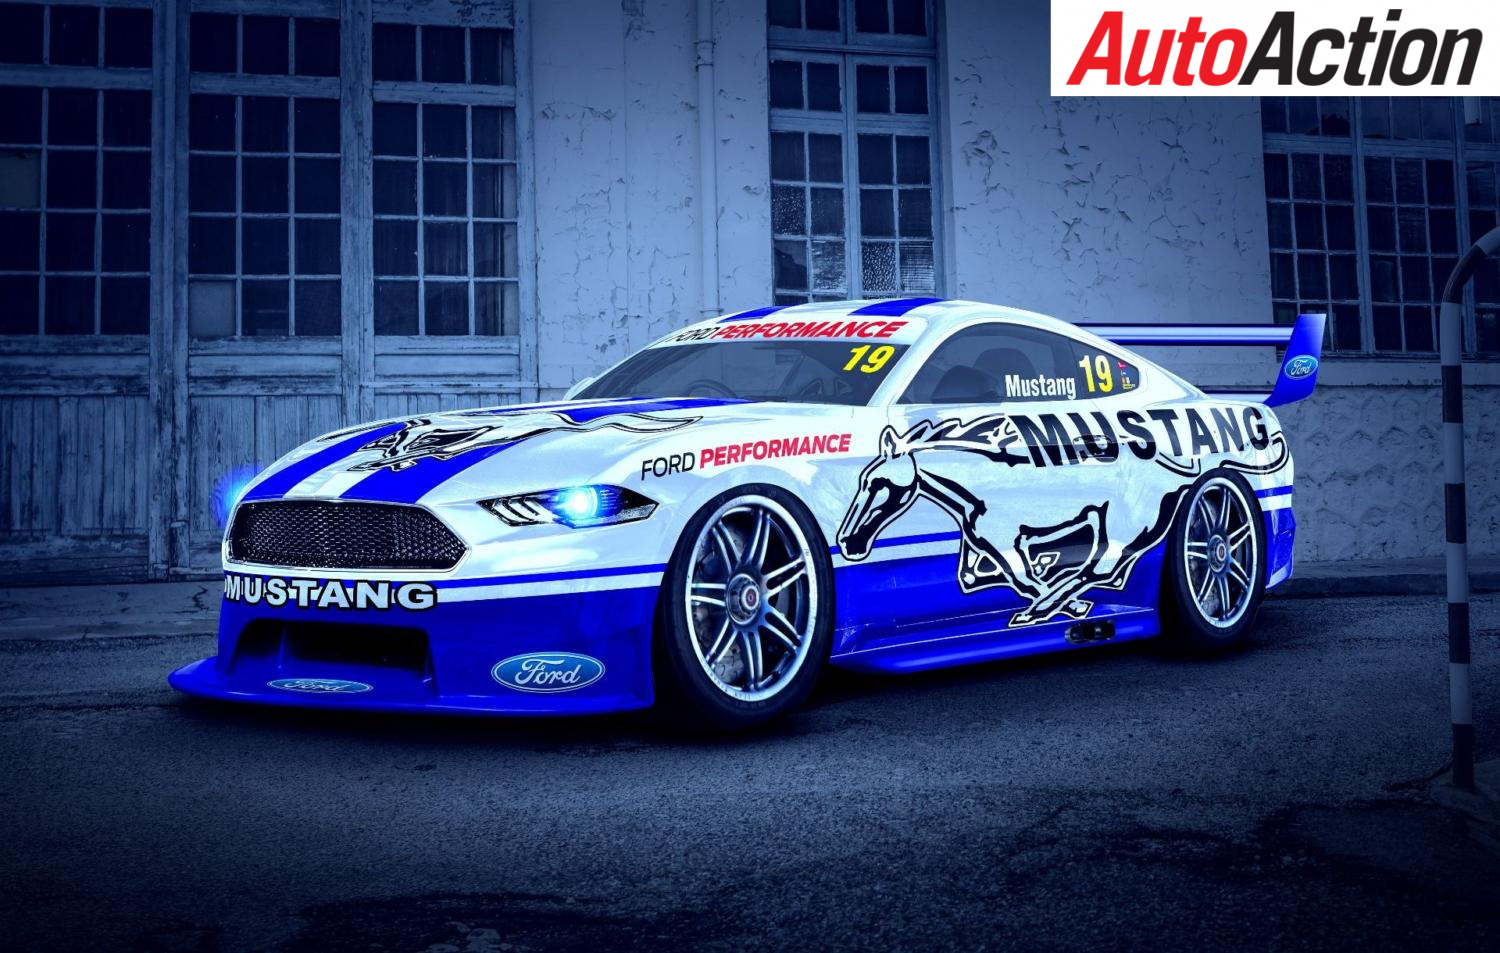 Mustang is go for 2019